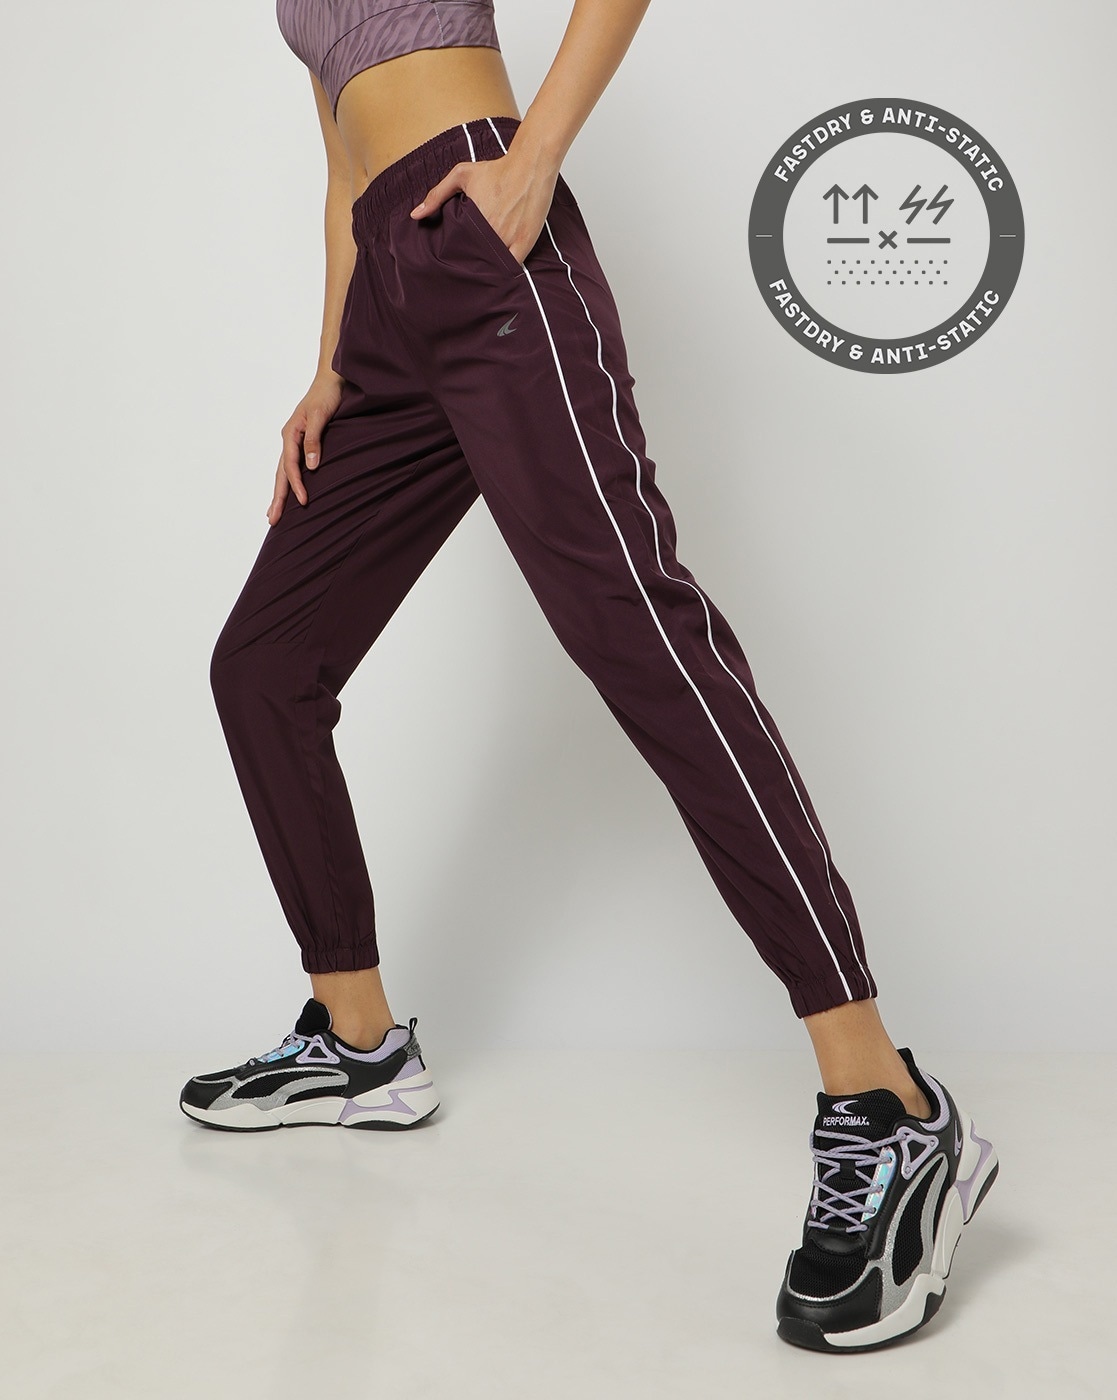 Track pants for men brand-new, fashionable cotton lounge pants and joggers  for the streets. Winter